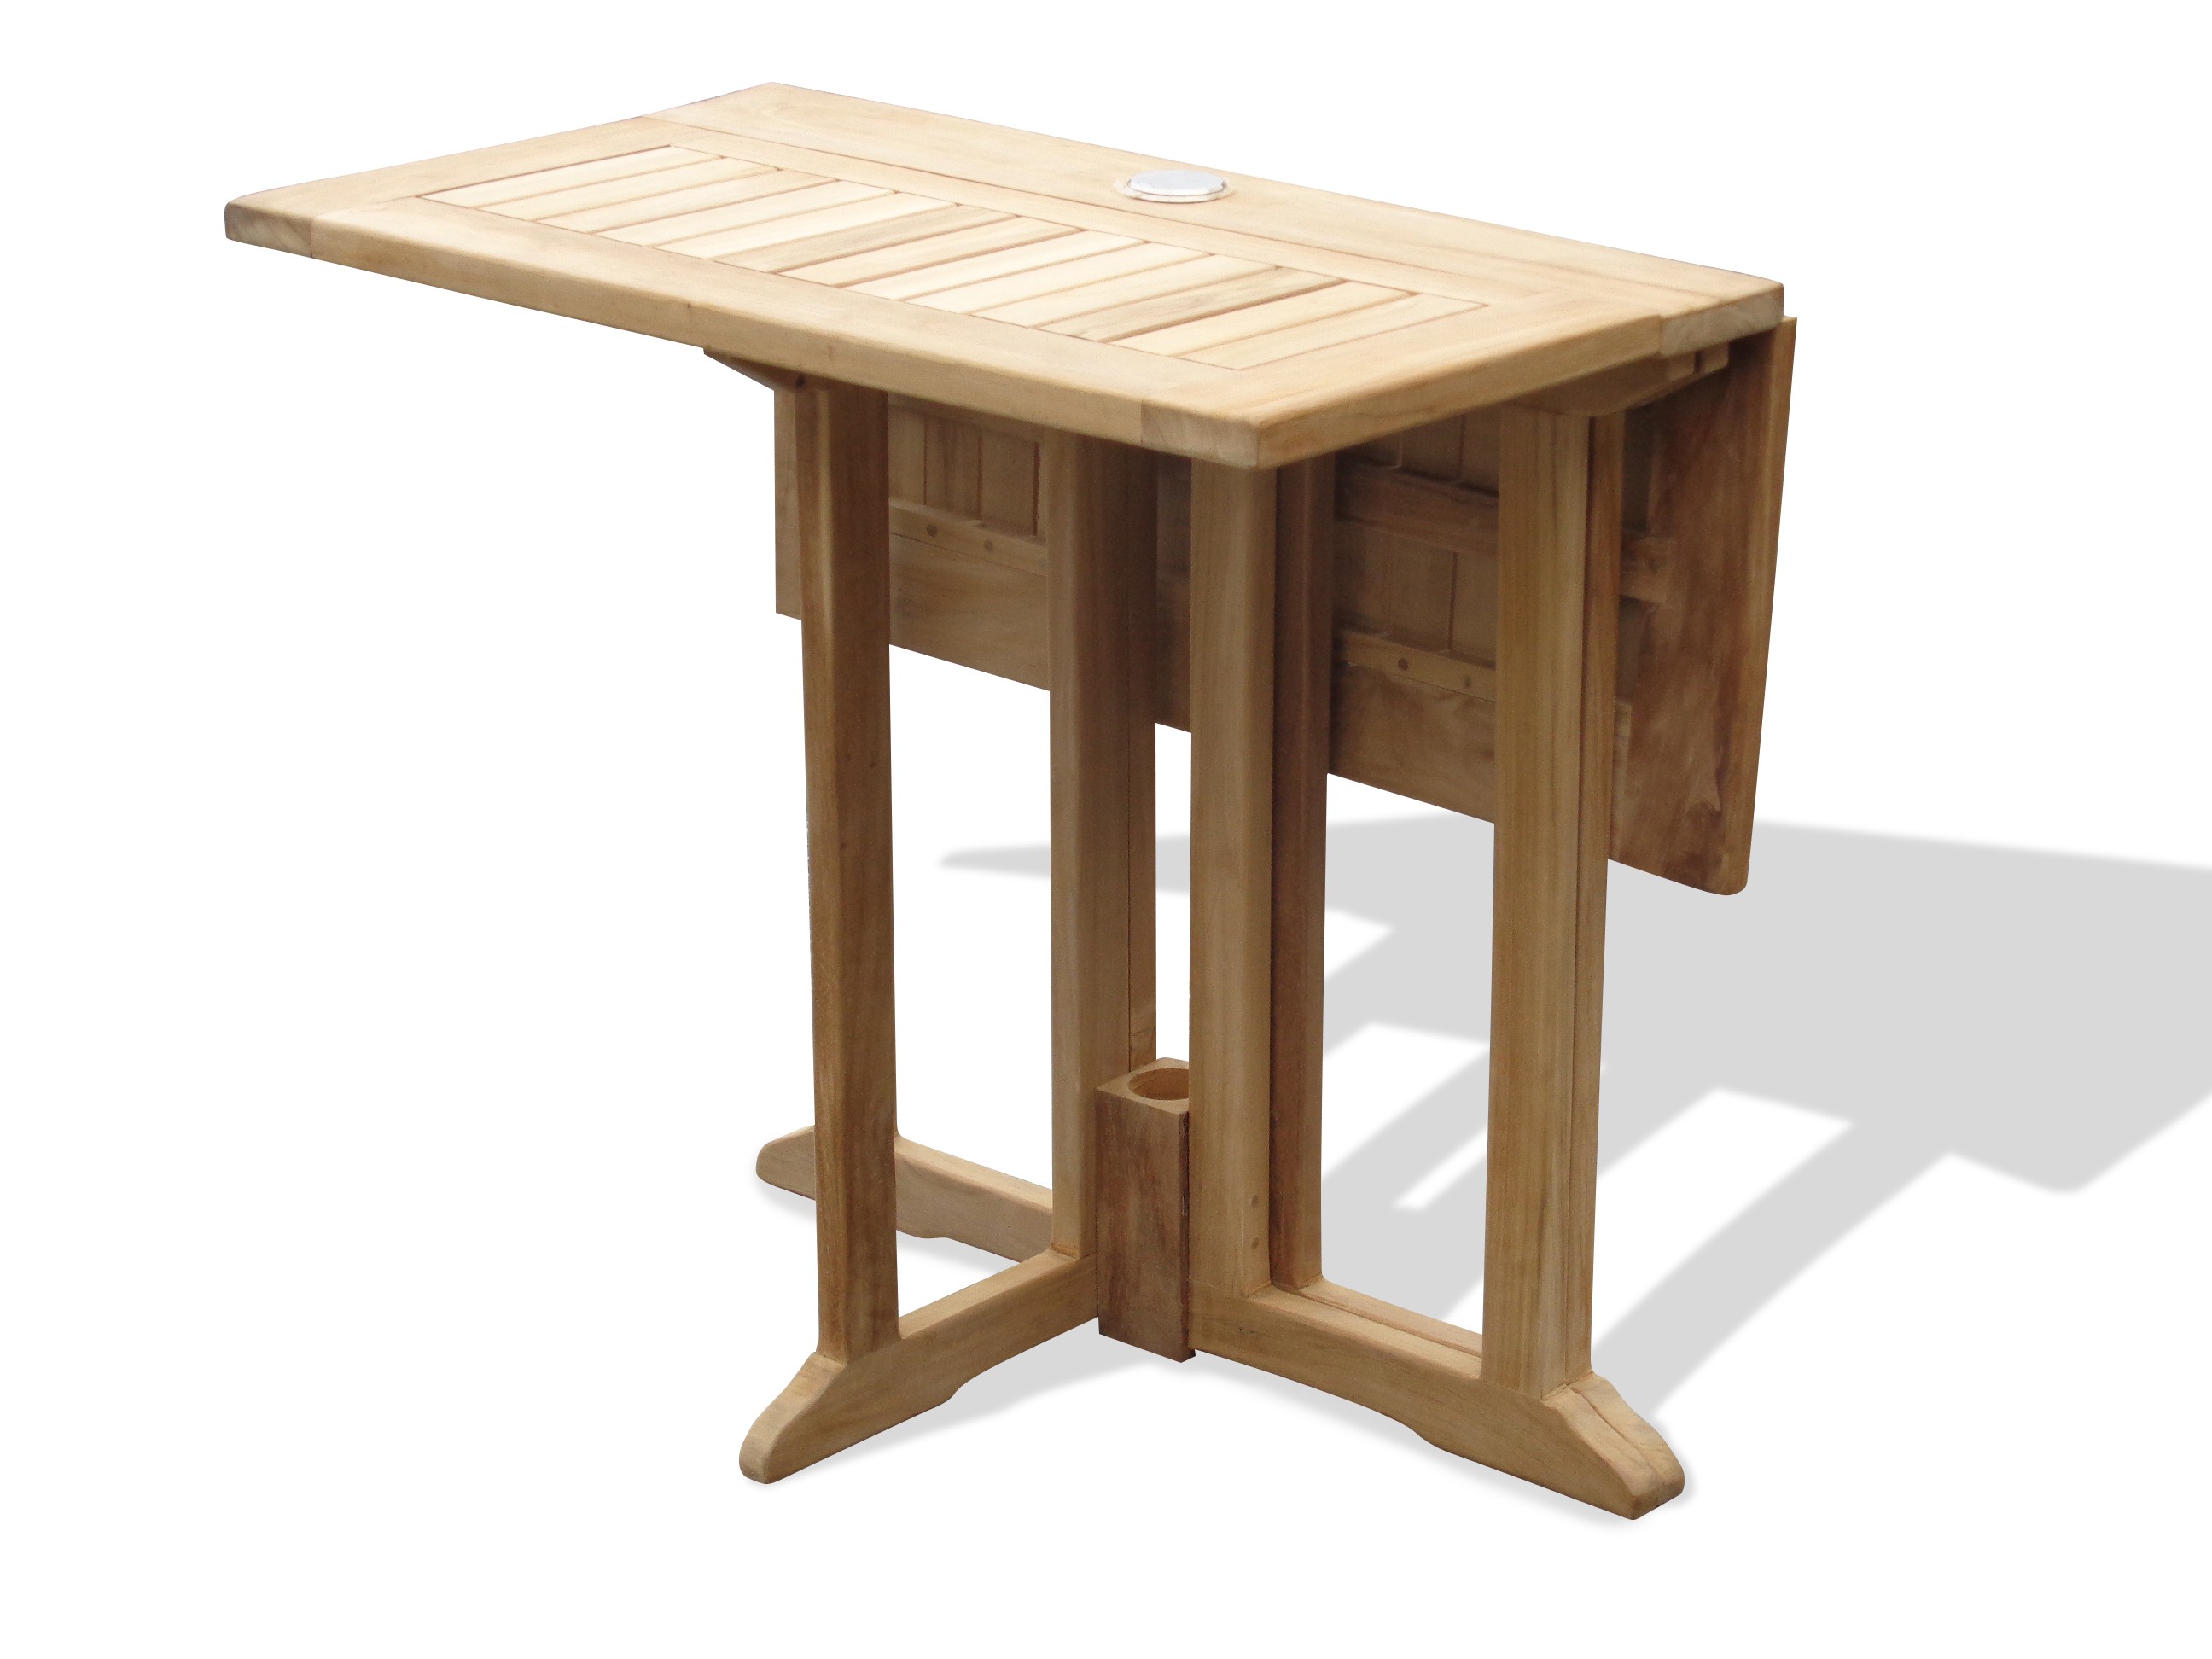 Barcelona 27" Square Drop Leaf Folding Teak Table...Use With 1 Leaf Up Or 2.... Makes 2 Different Tables